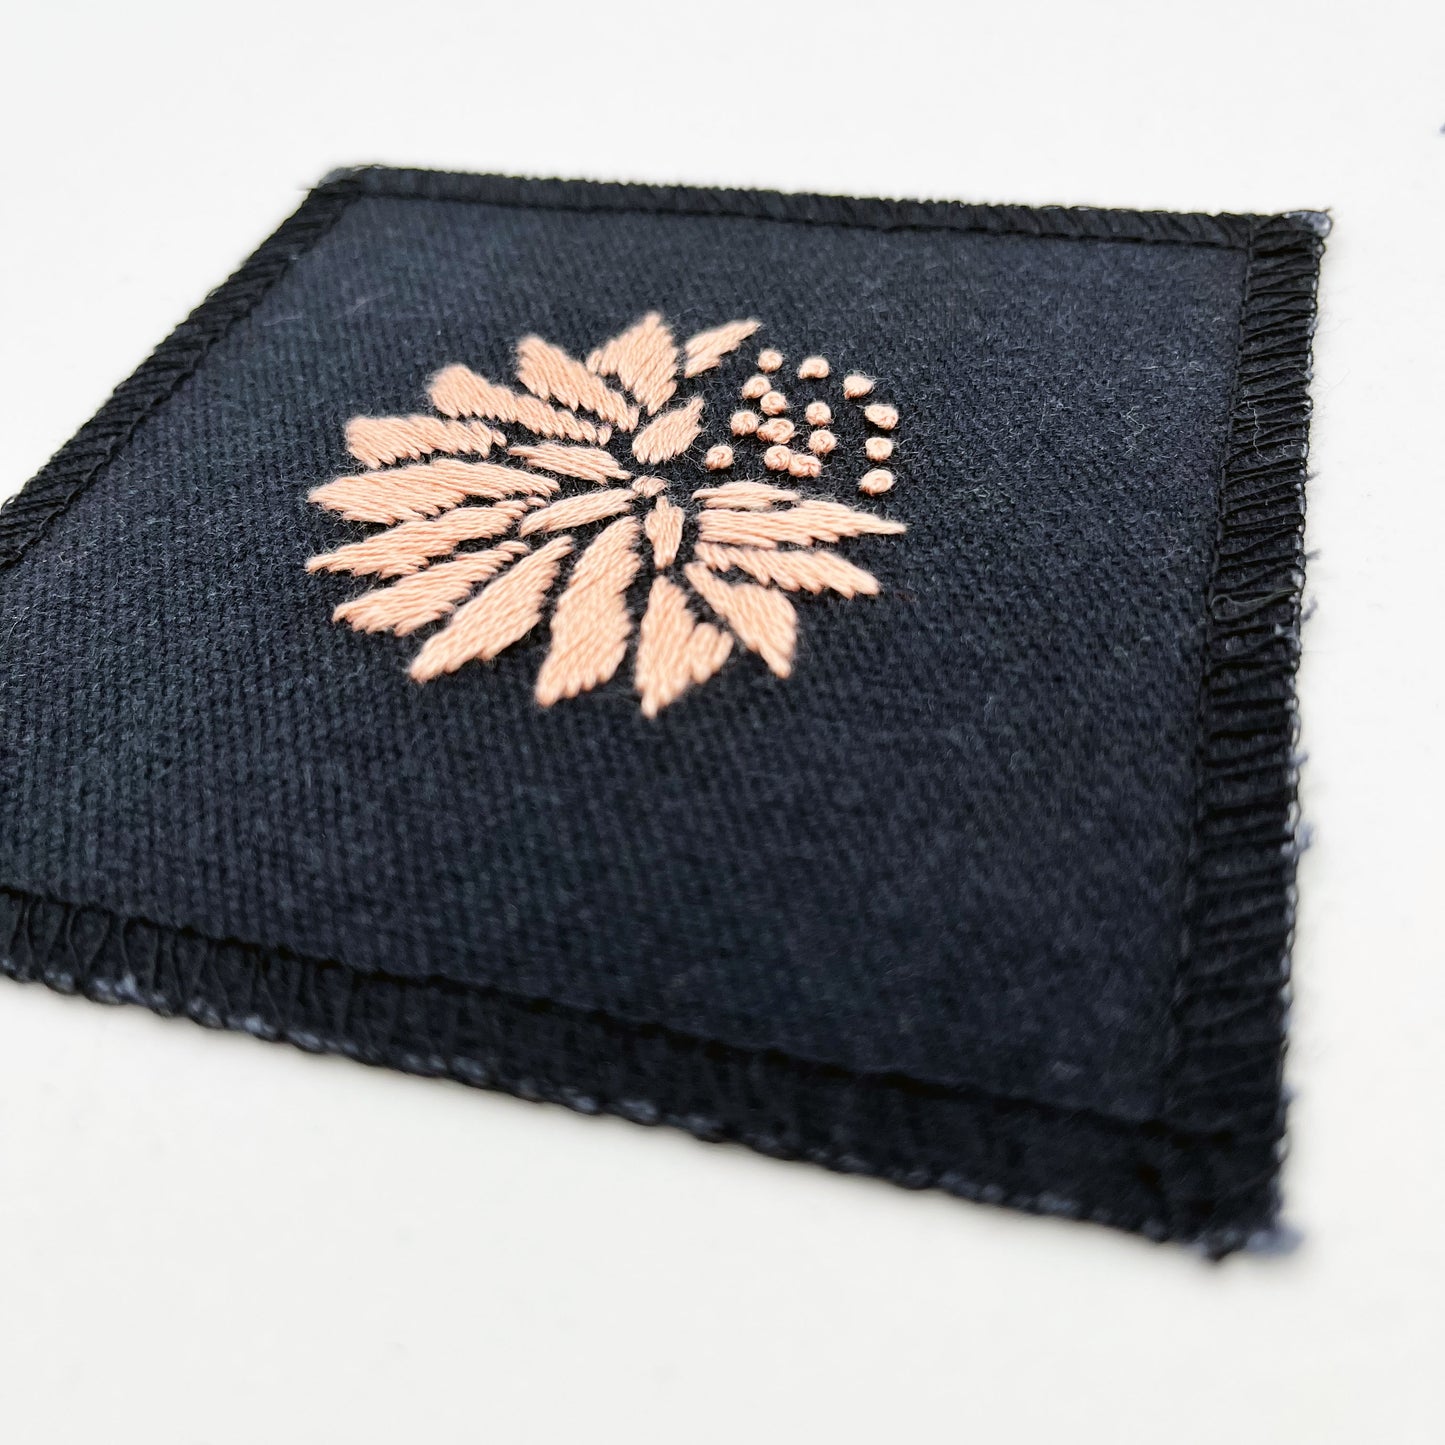 a close up angled view of a square patch in black fabric, hand embroidered with a peach colored abstract dandelion made mostly of petals, with a quarter of them replaced with french knots, with overlocked edges, on a white background